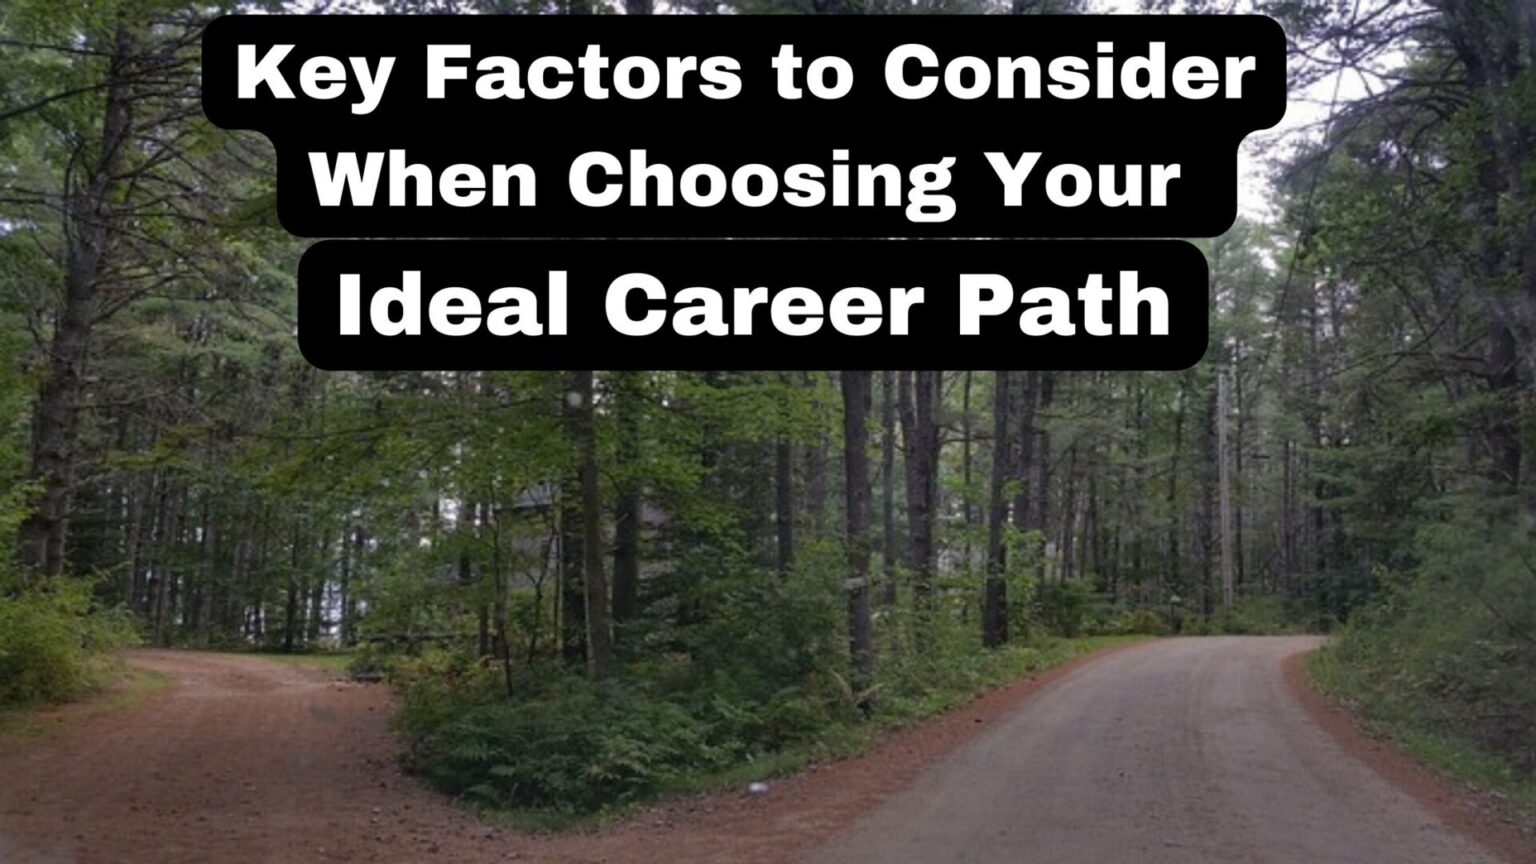 Key Factors to Consider When Choosing Your